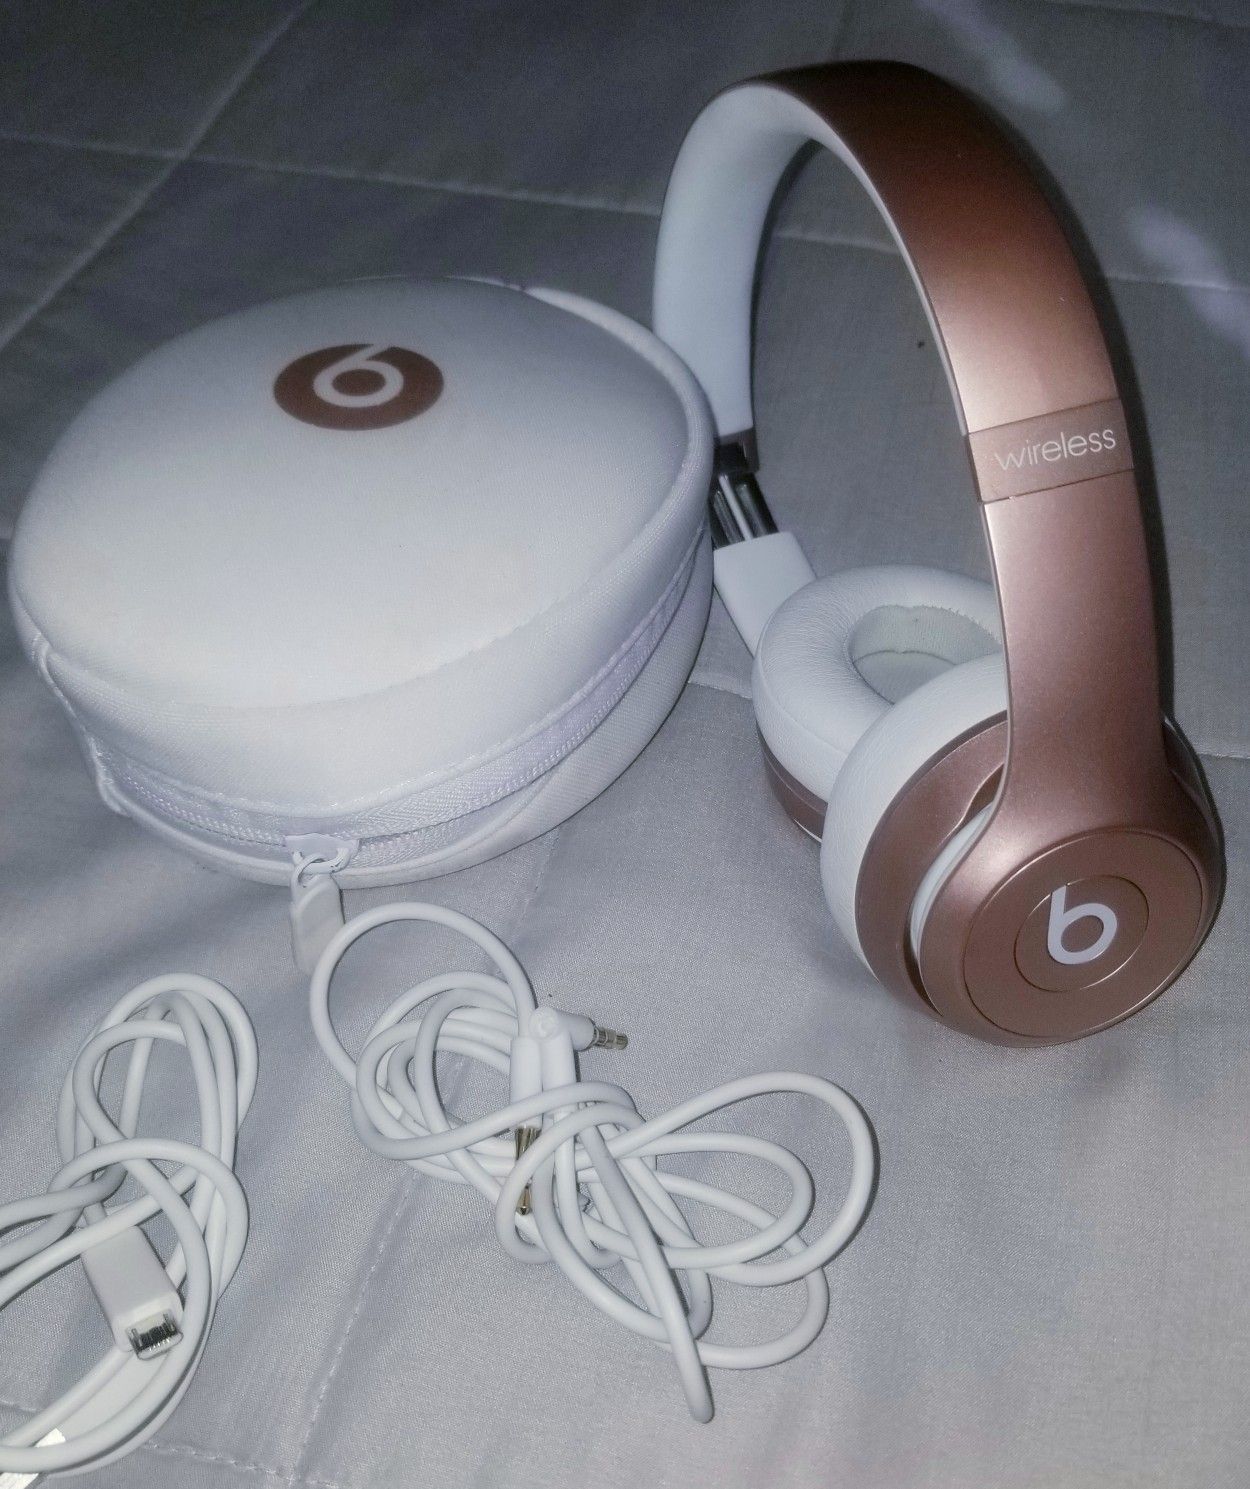 ☆☆☆☆☆ BEATS SOLO WIRELESS GOLD PINK EXCELLENT CONDITION!!!🤩🤩🤩😍😍😍